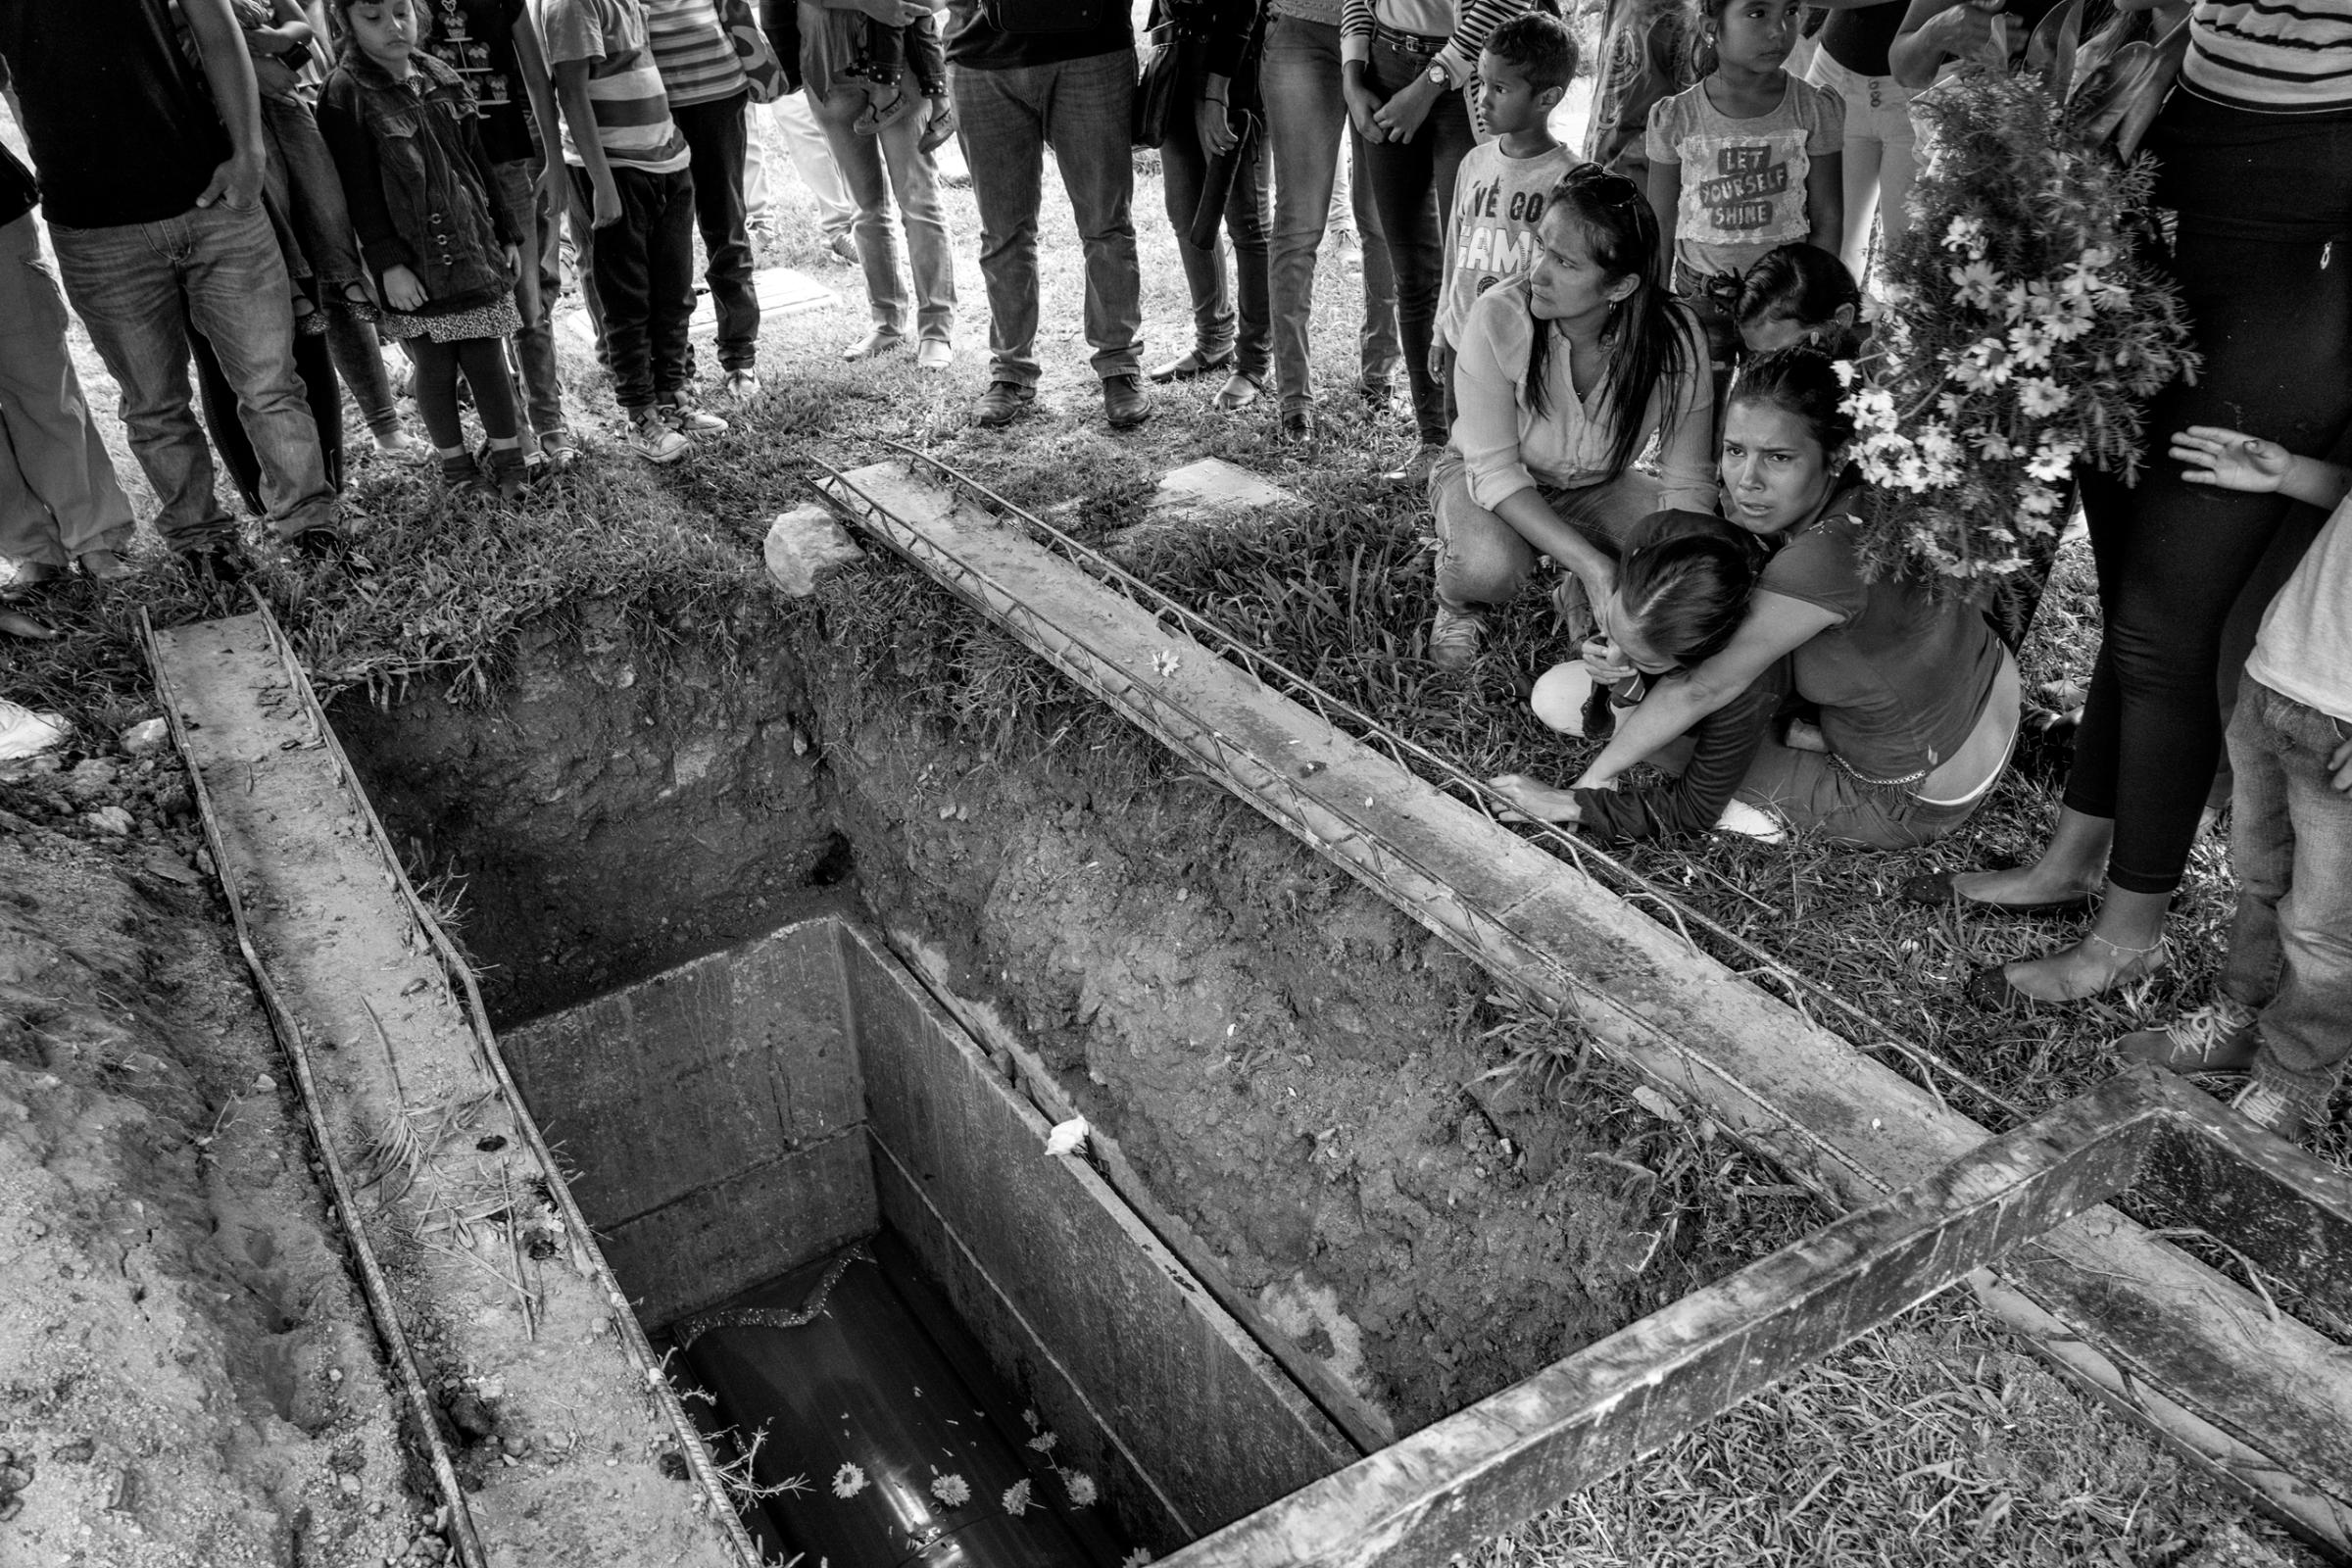 The wife of 25-year old Fredy Guerrero, who was tortured and died while under police detention, cries at the grave of her husband, June 2016.